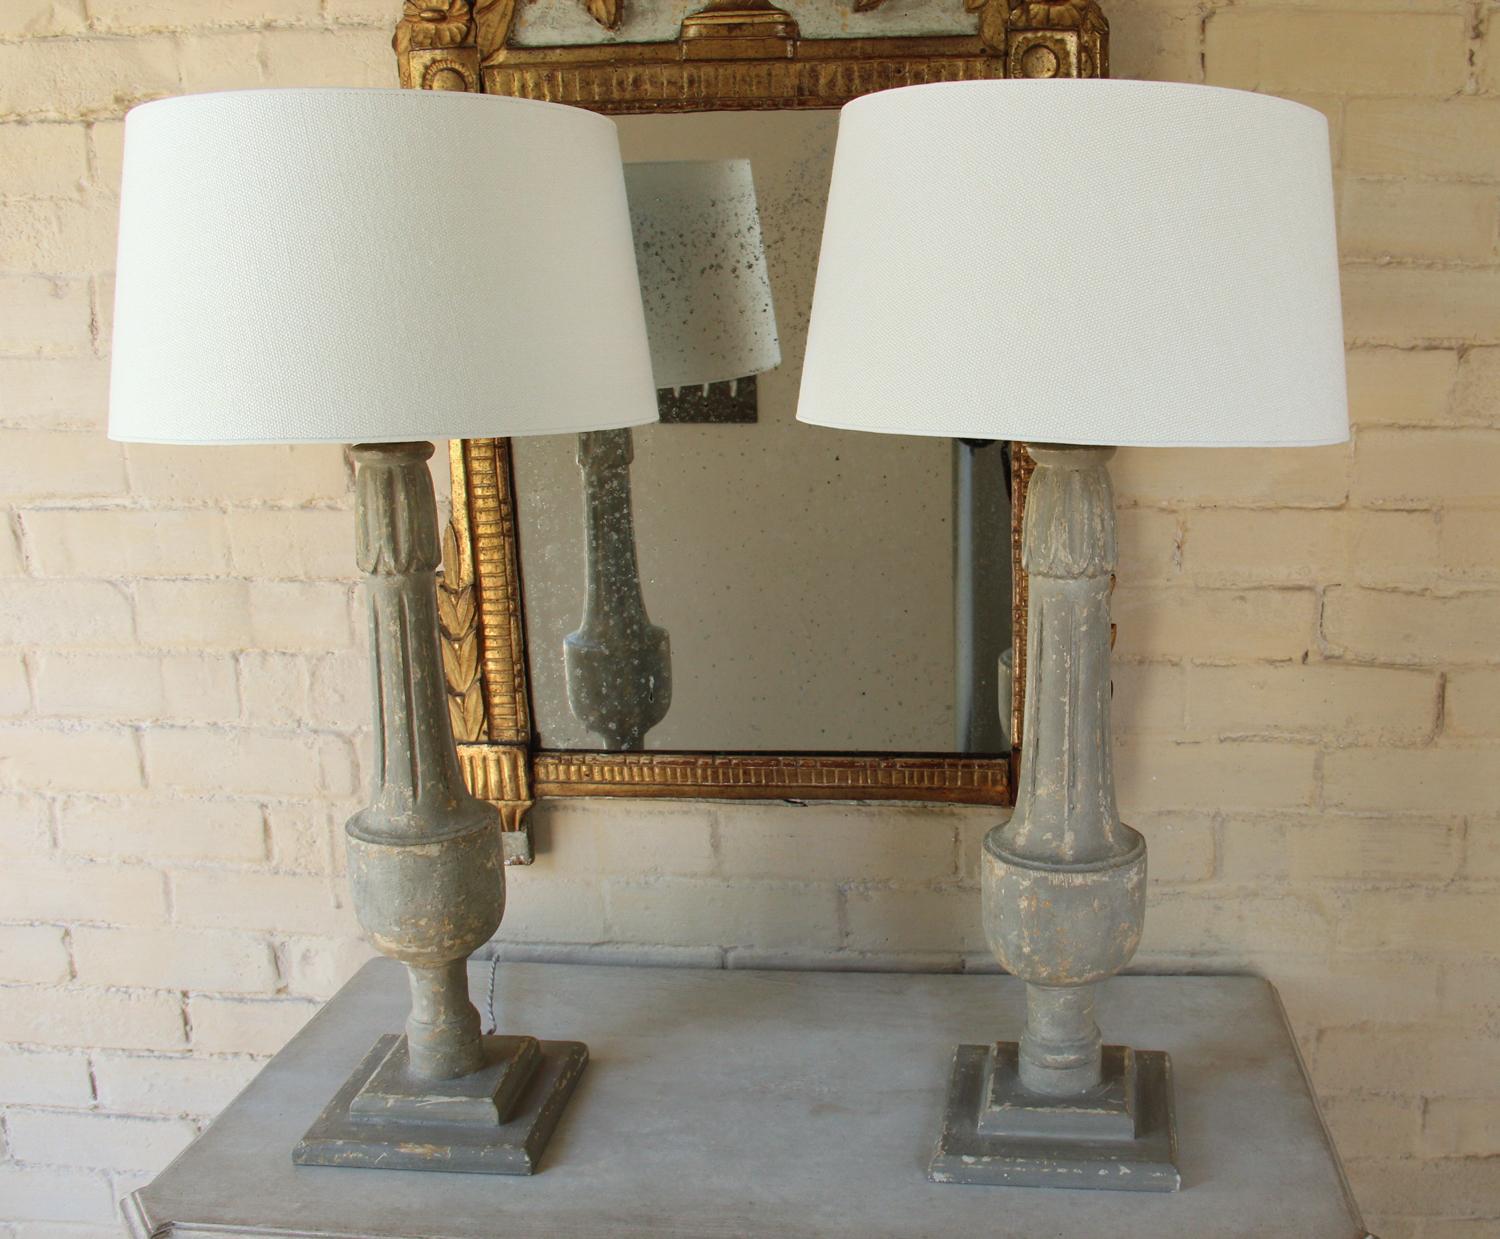 A beautiful pair of 19th c. French balustrades converted to table lamps with braided French cords. The patina is a very neutral aged gray. The lampshade is handmade in Belgium of fine linen and has a high quality gold foil inner lining. The lining